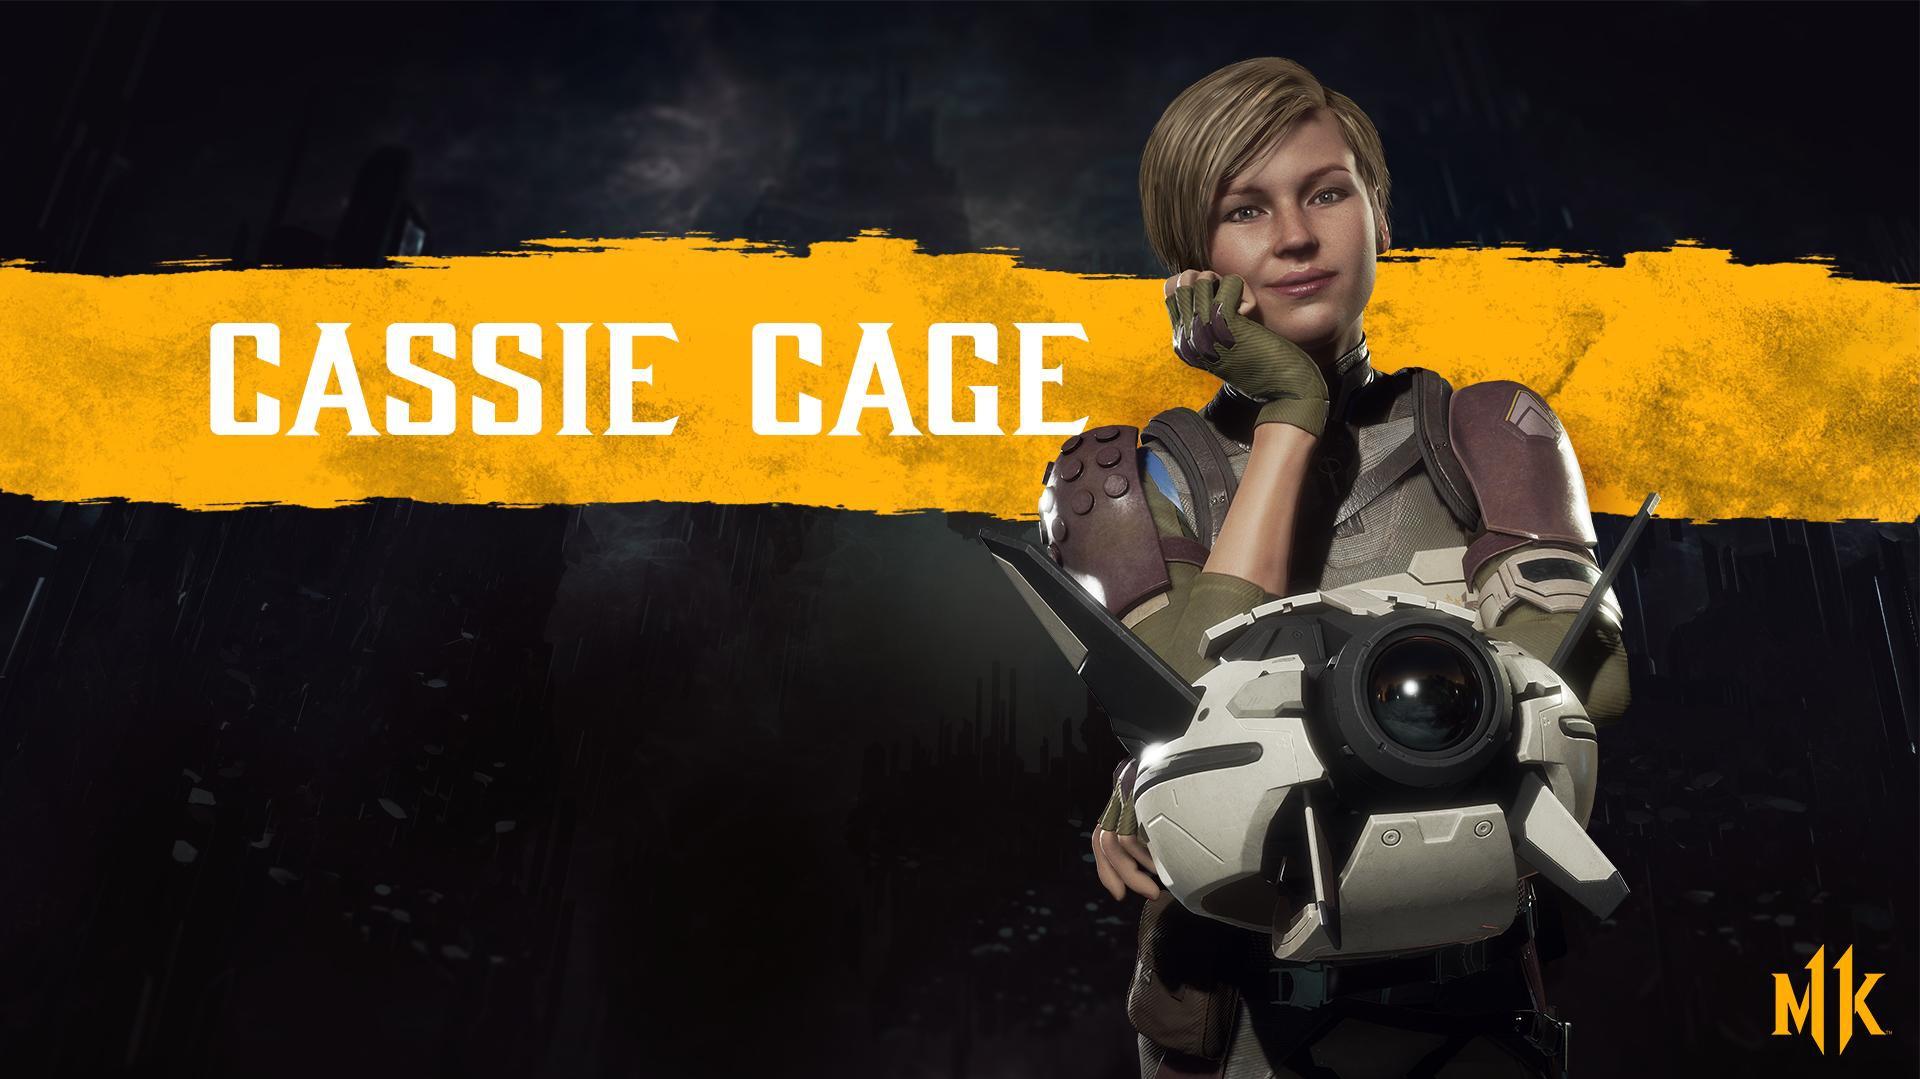  Cassie Cage HD Wallpapers and Backgrounds